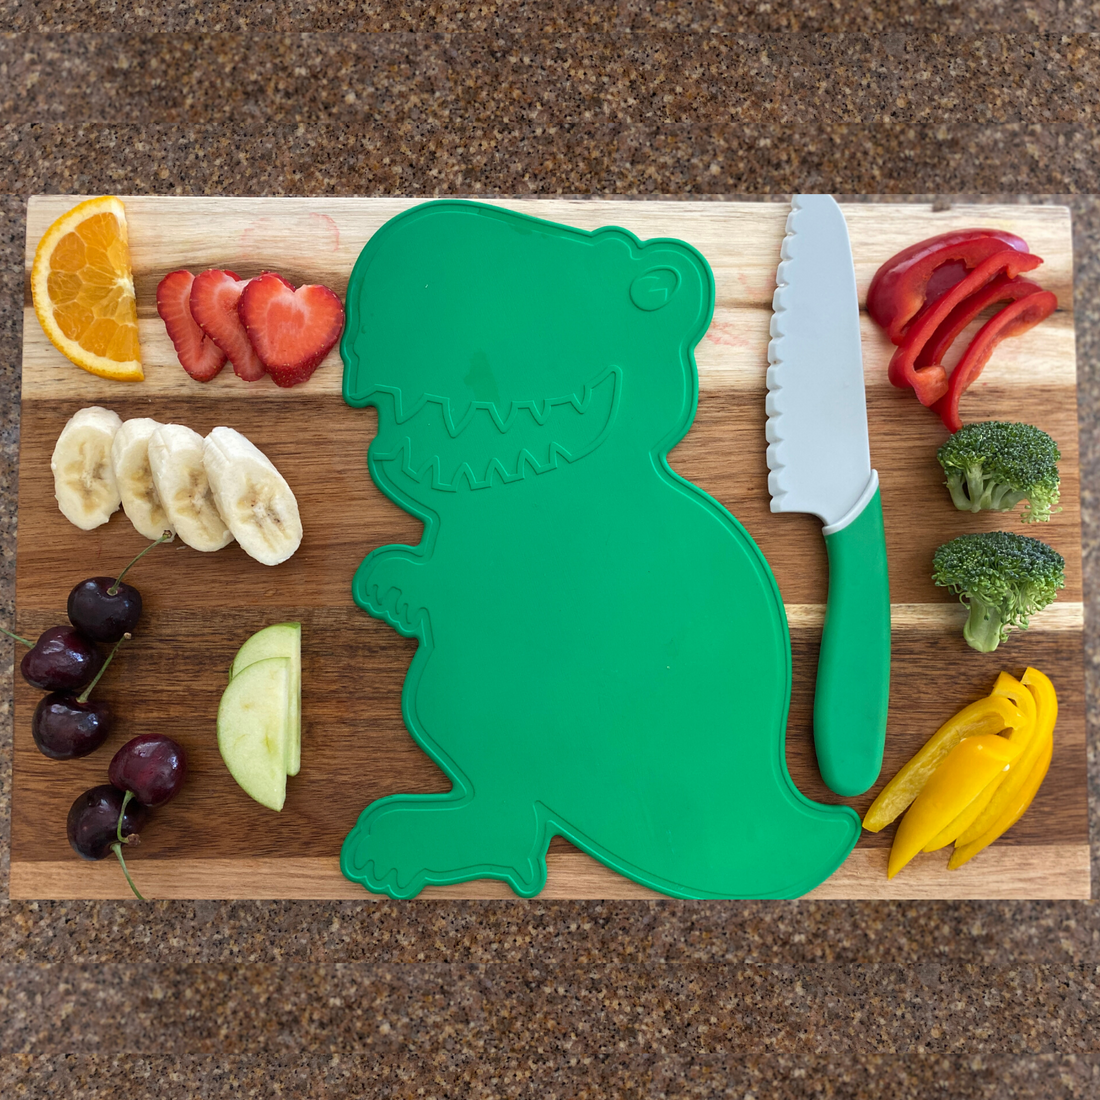 Lifestyle image of Dinosaur Cutting Board and Kid Safe Knife Set used to slice fruits and vegetables